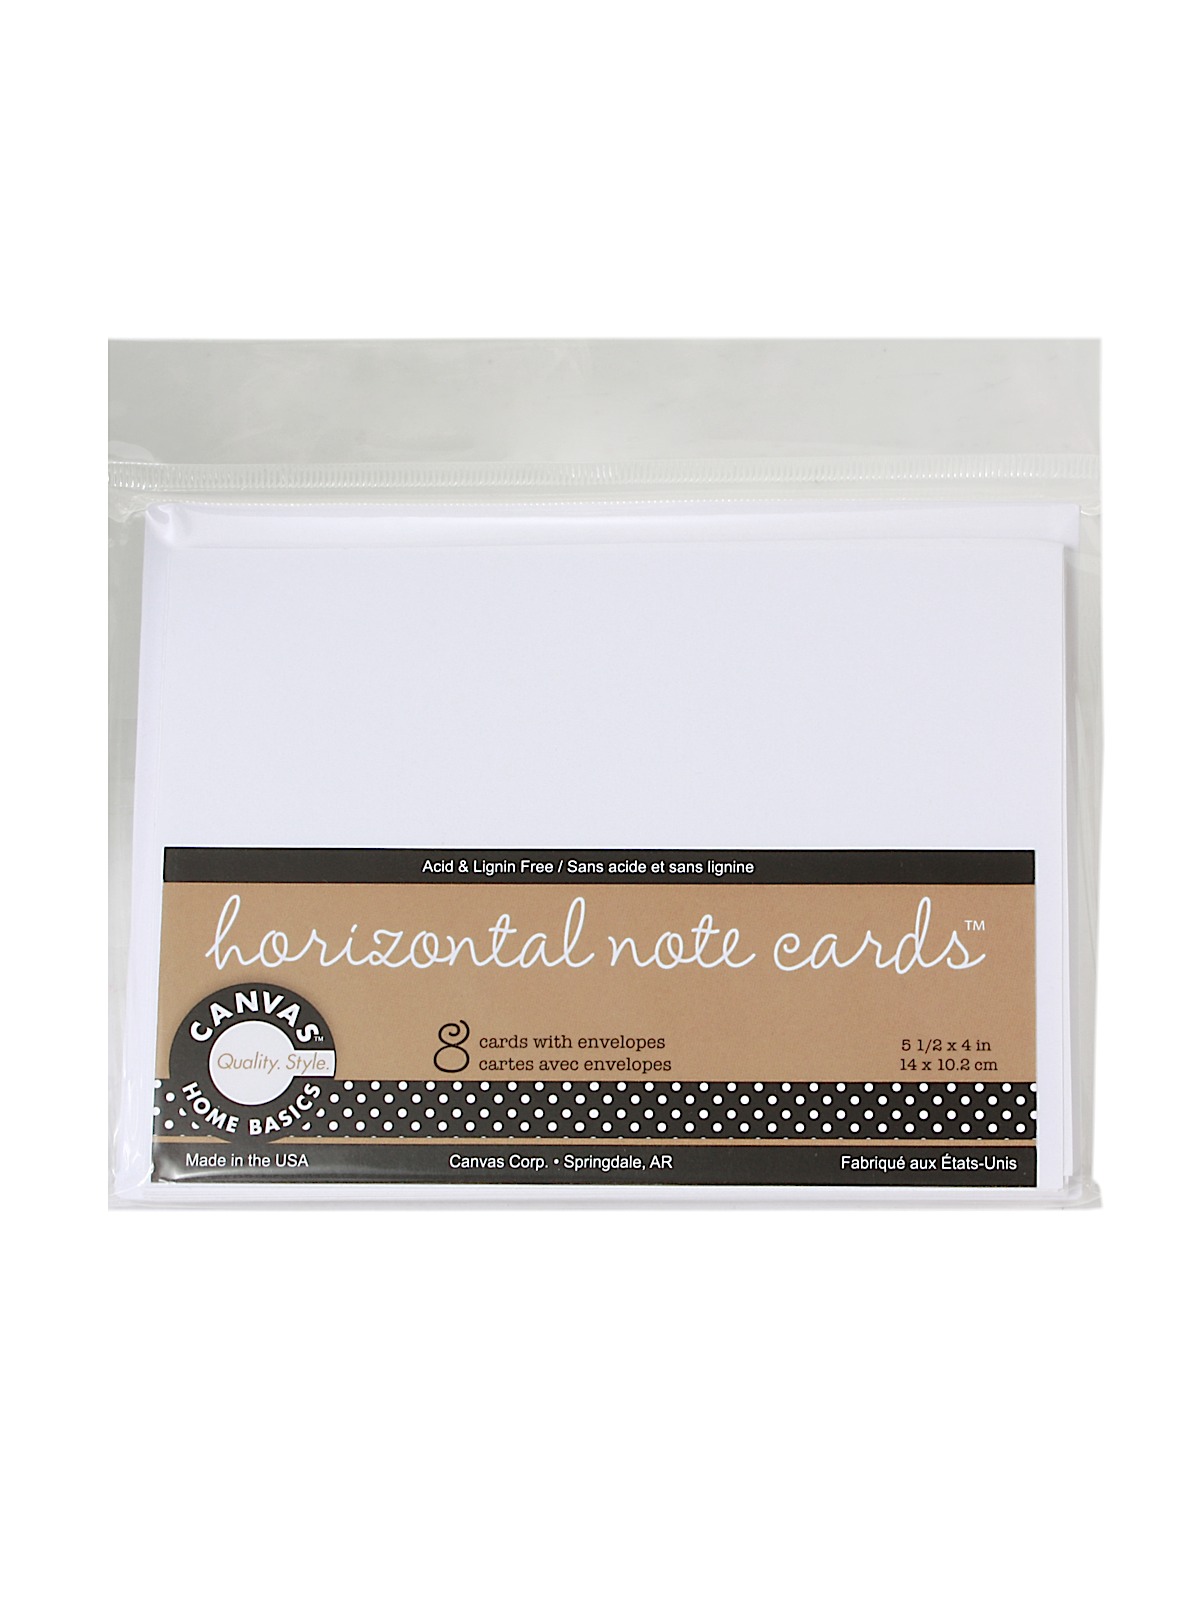 Packaged Cards And Envelopes Horizontal Note Cards With Envelopes White 5 1 2 In. X 4 In. Pack Of 8